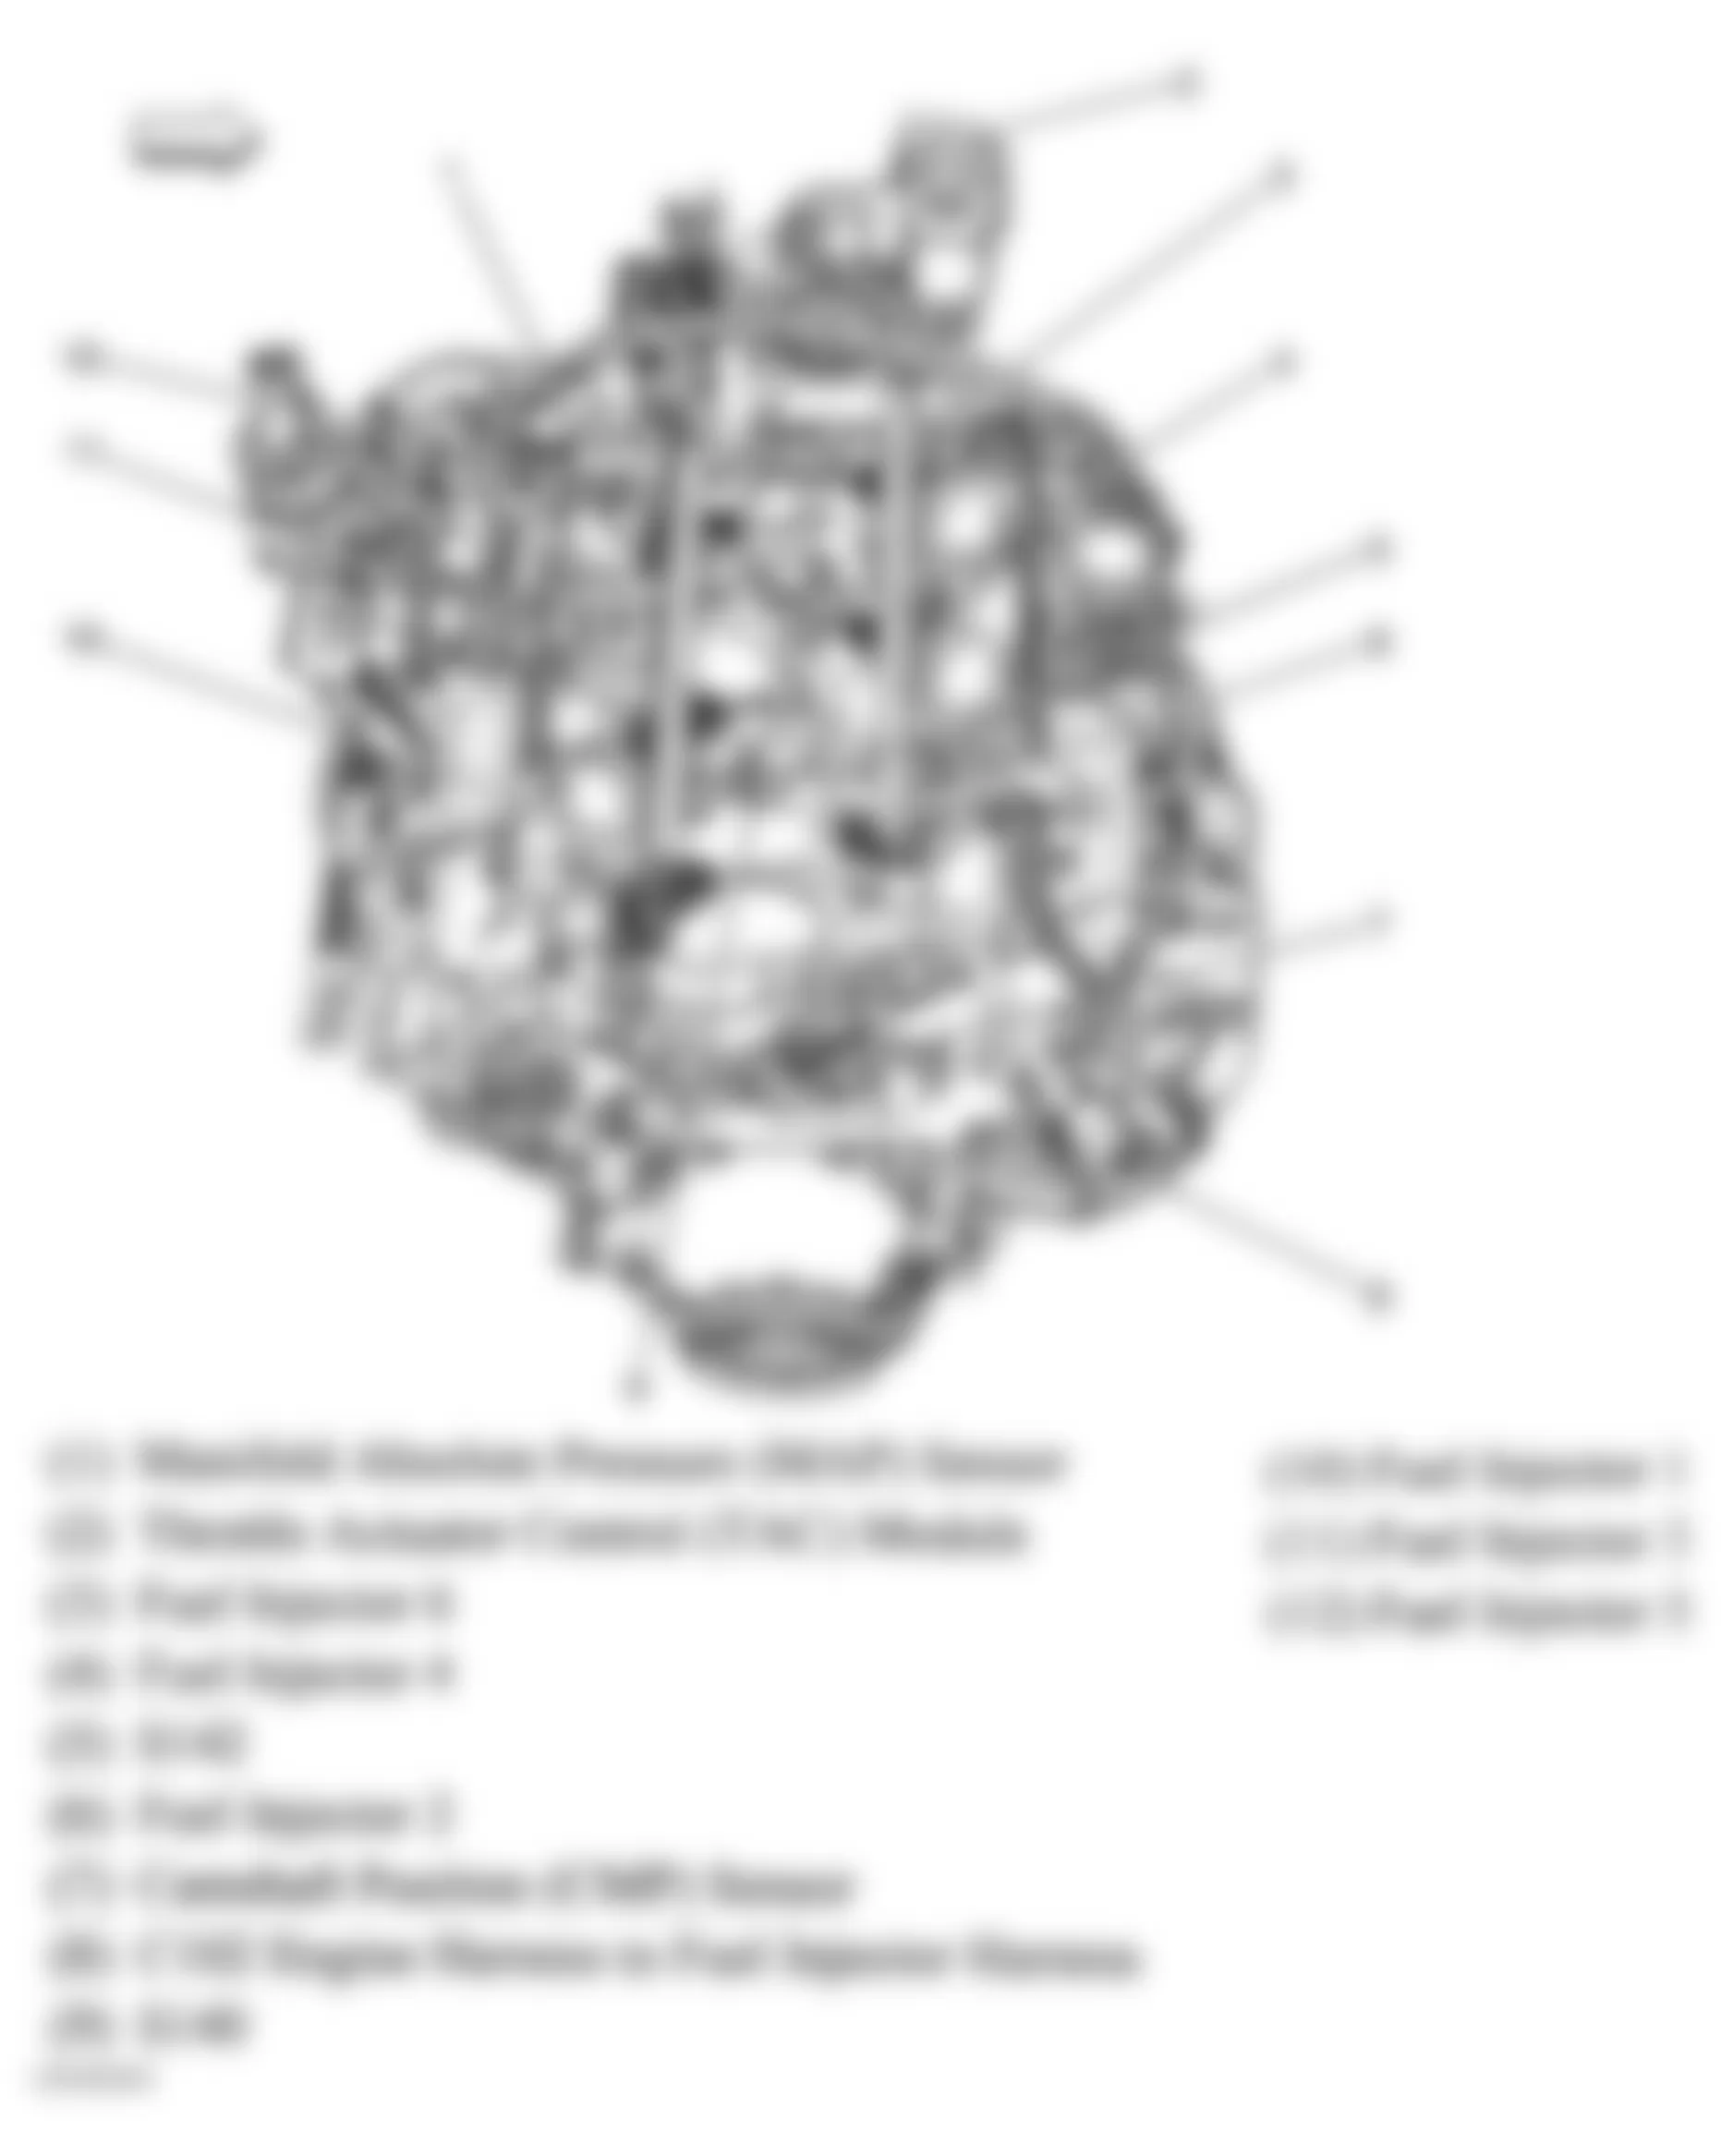 Buick Terraza CXL 2006 - Component Locations -  Engine Assembly (3.5L)